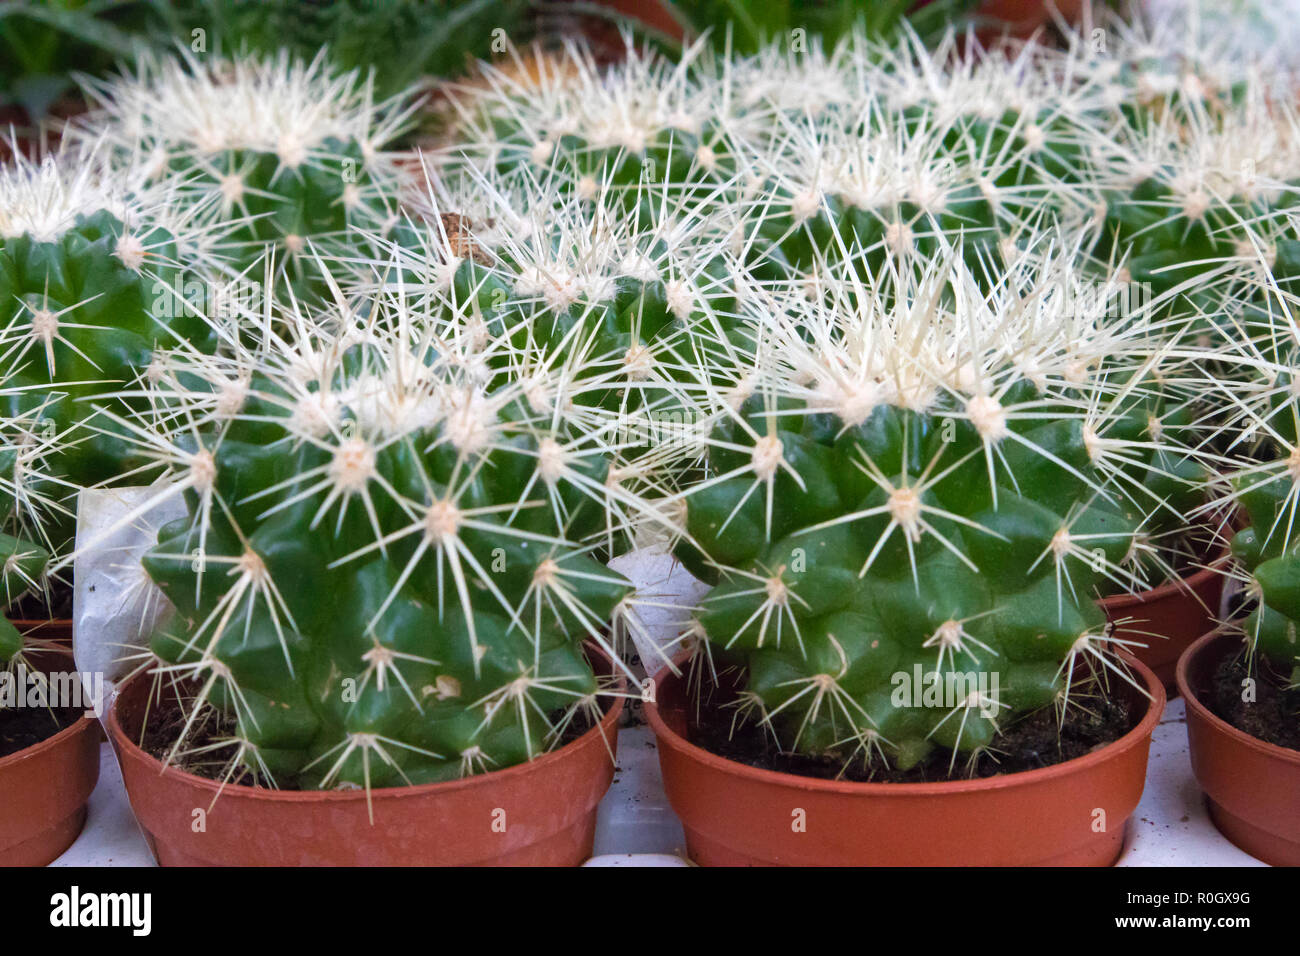 Different kinds of cacti growing in a plastic pots exhibited in gardening shop Stock Photo